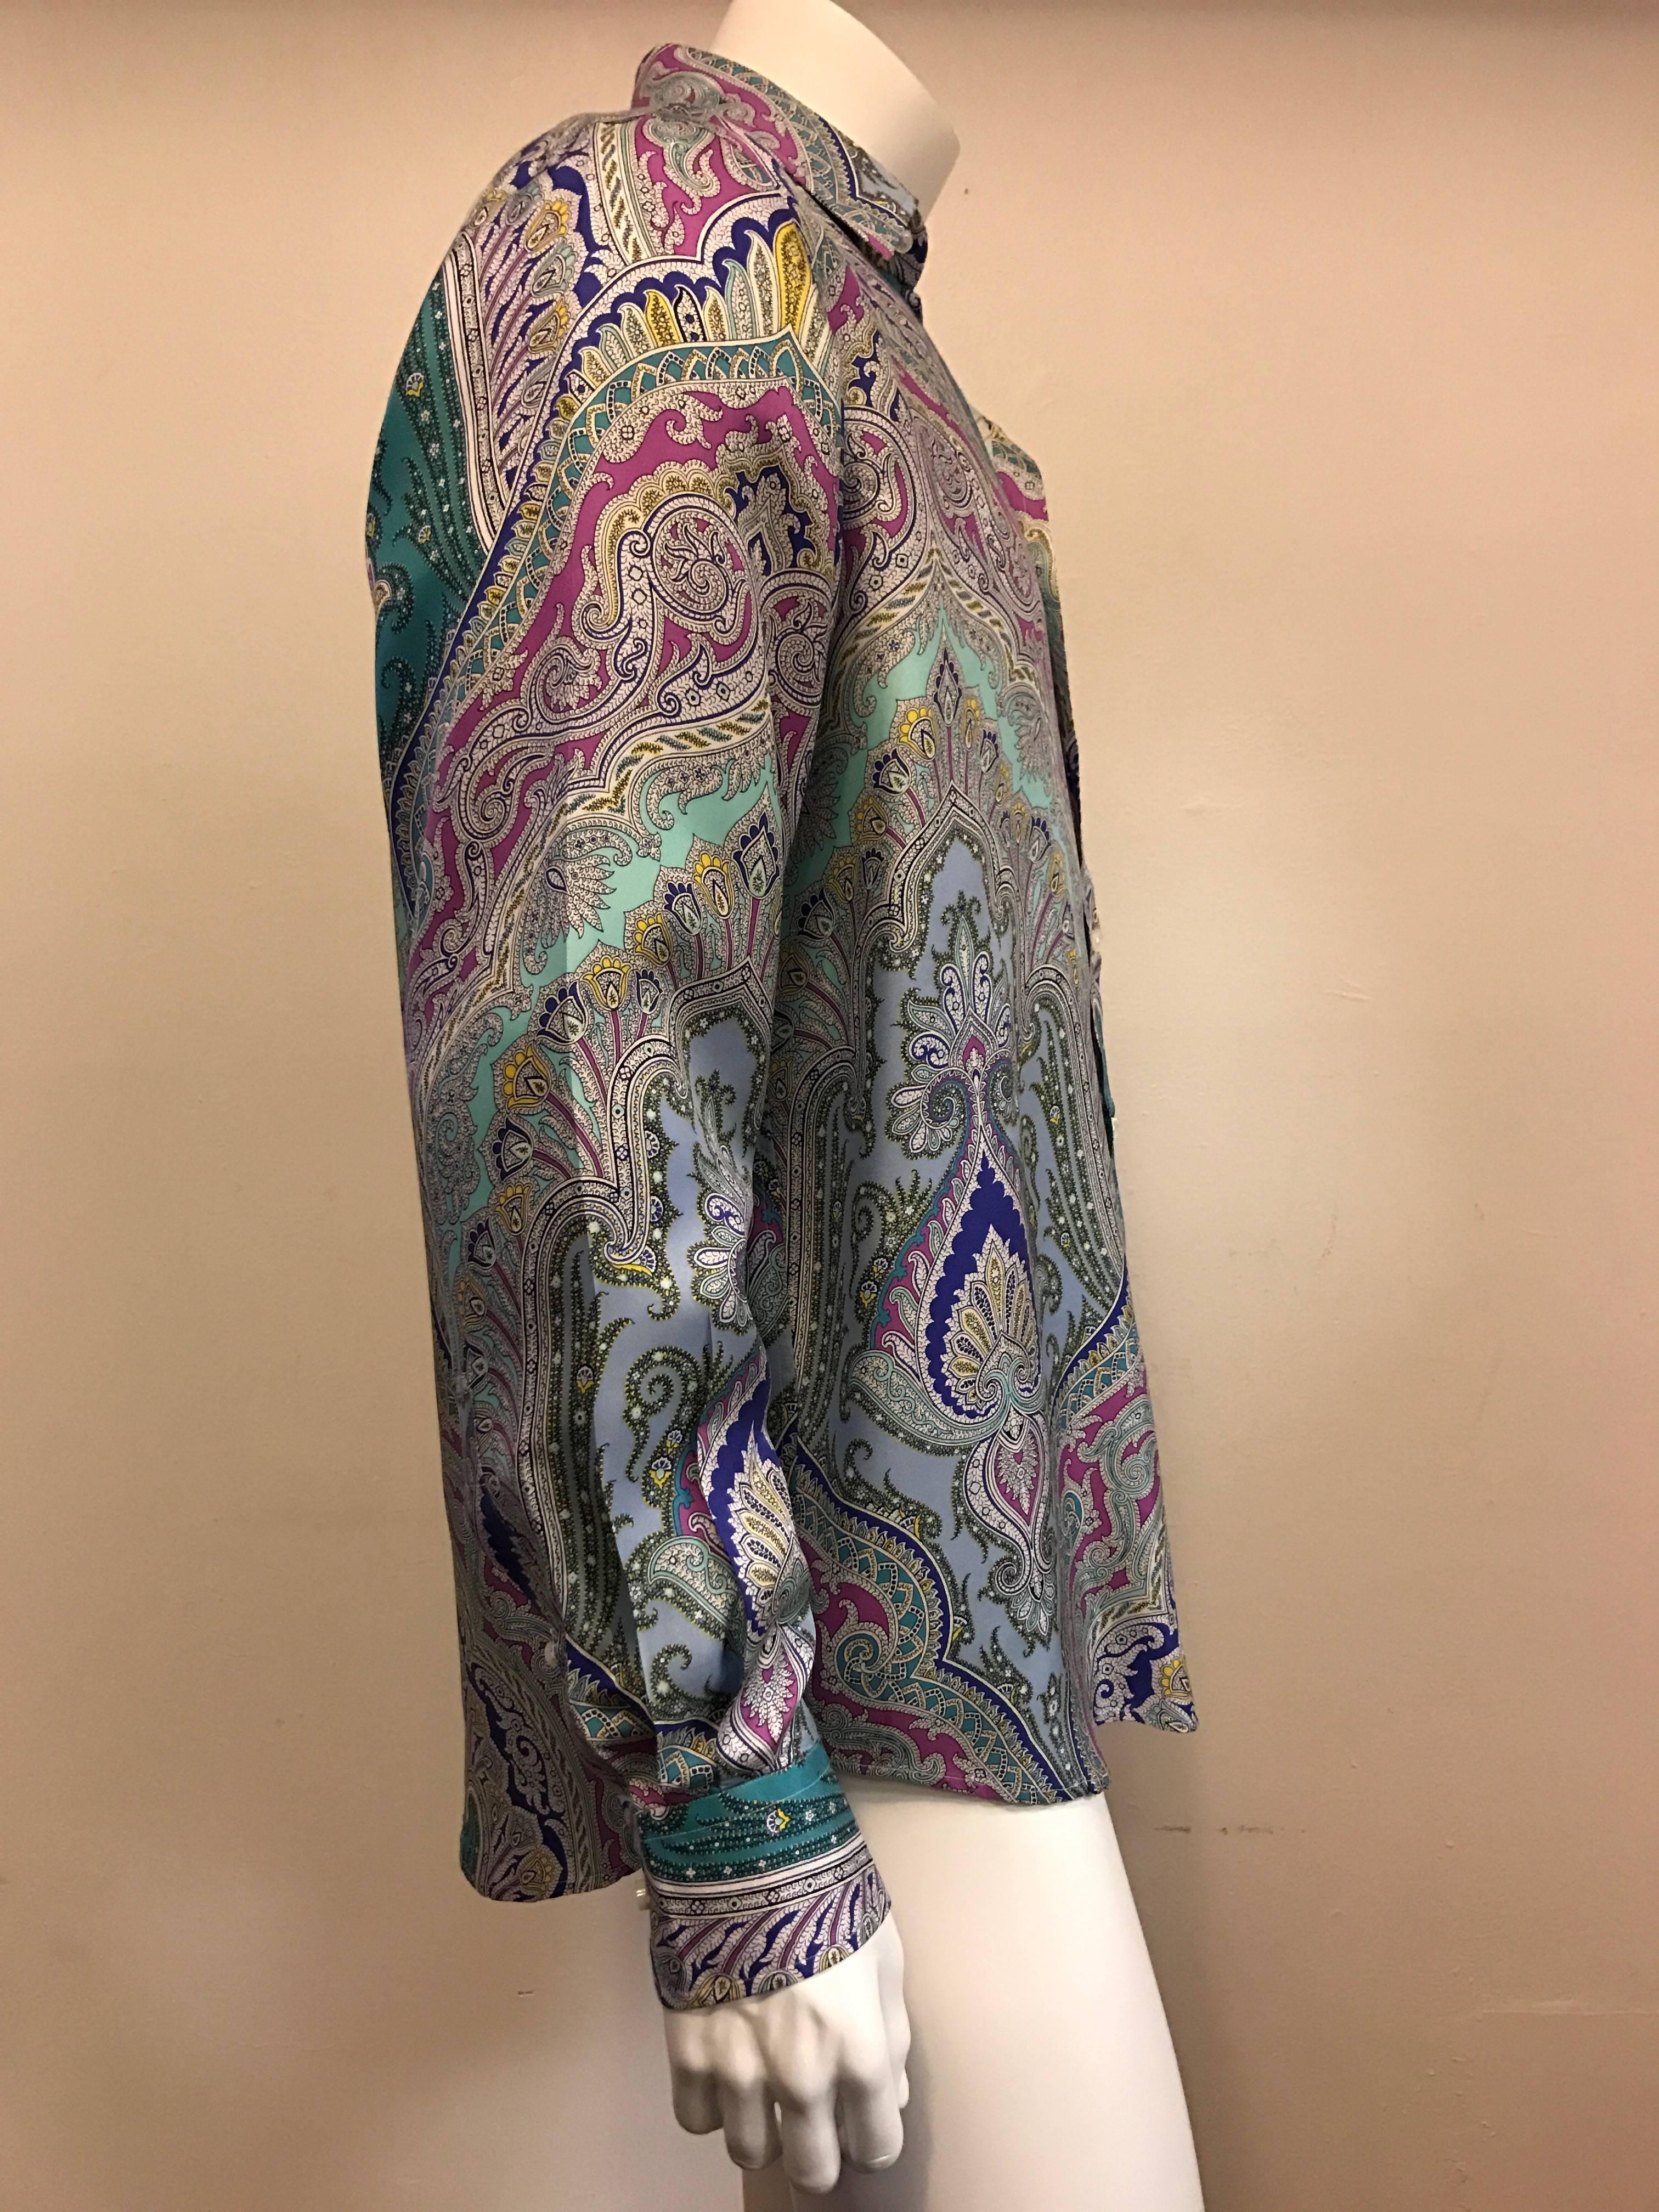 Ralph Lauren Purple Label makes a supremely soft silk shirt in shades of turquoise, orchid, celadon, purple and lemon paisley print on a pale blue background.  Removable collar stays, one button cuffs.  So very elegant! Measures 16.5 inches collar,